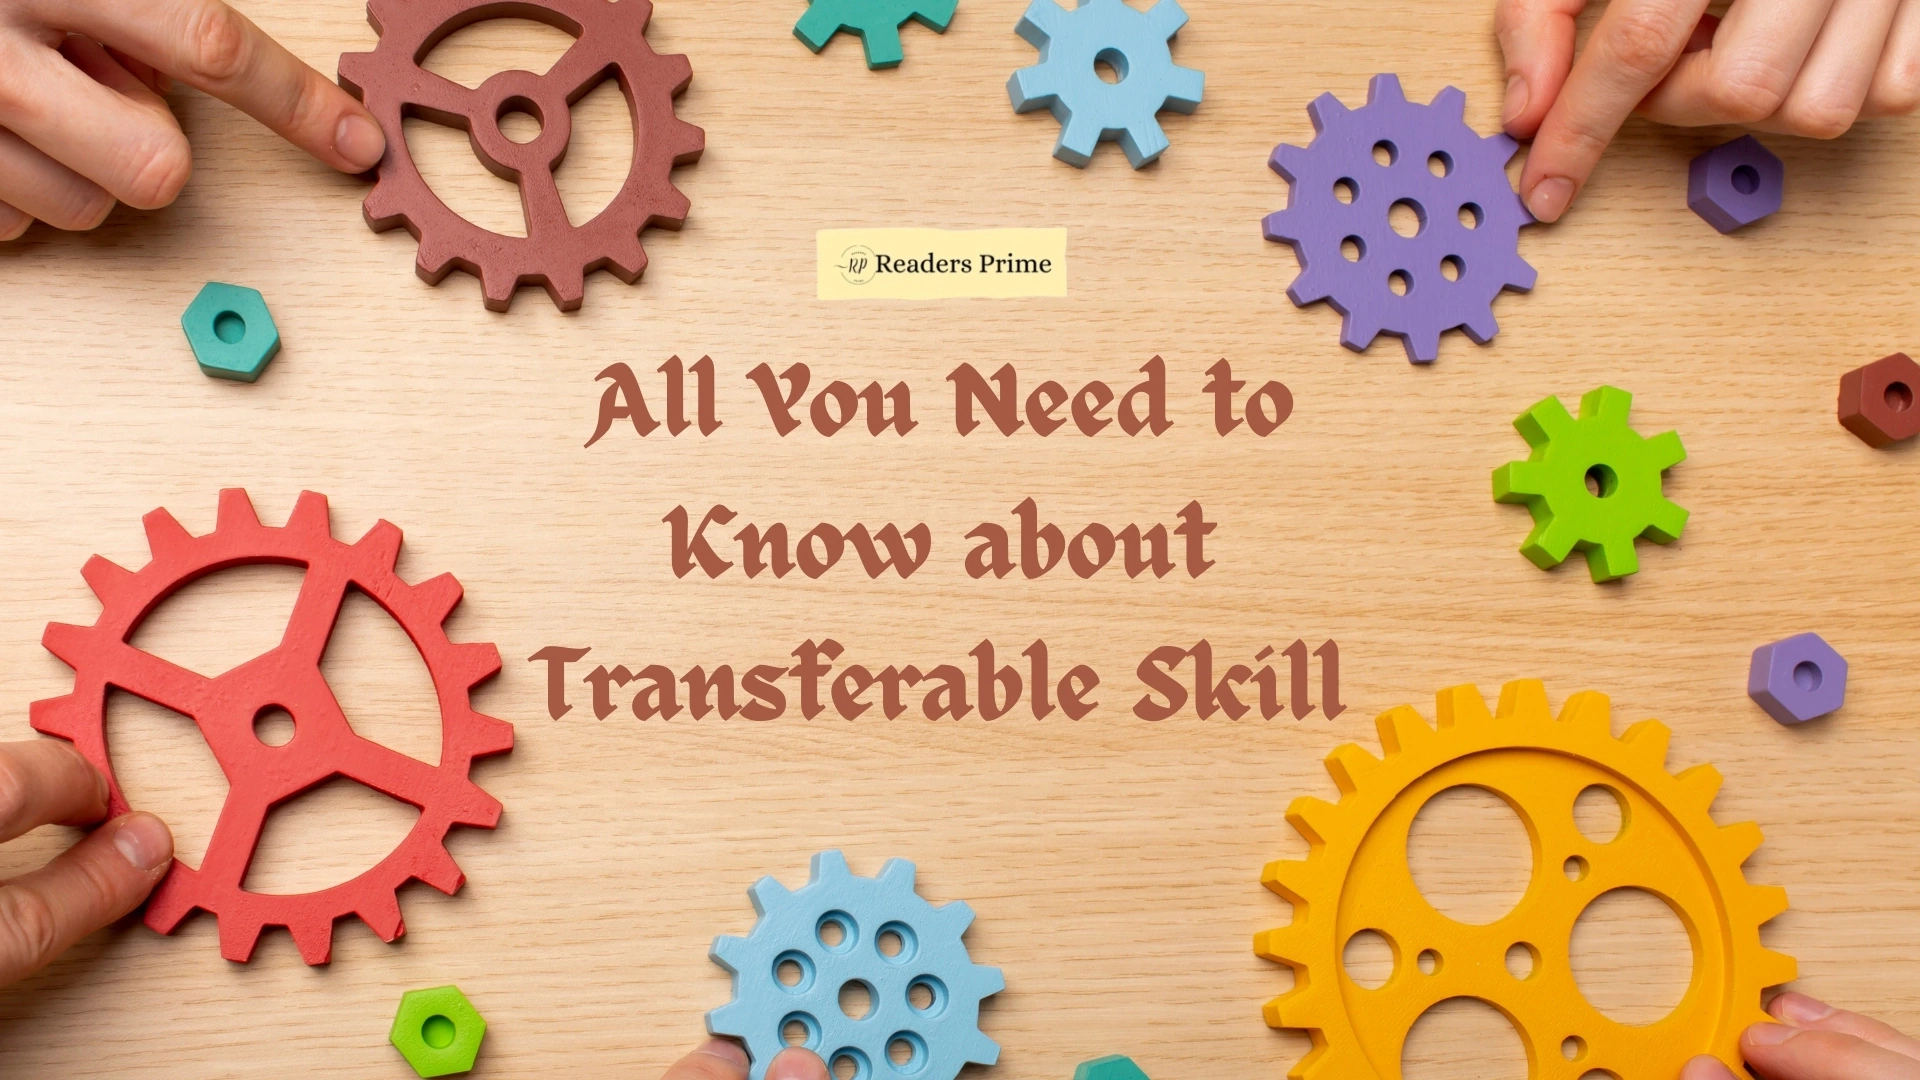 All You Need to Know about Transferable Skill